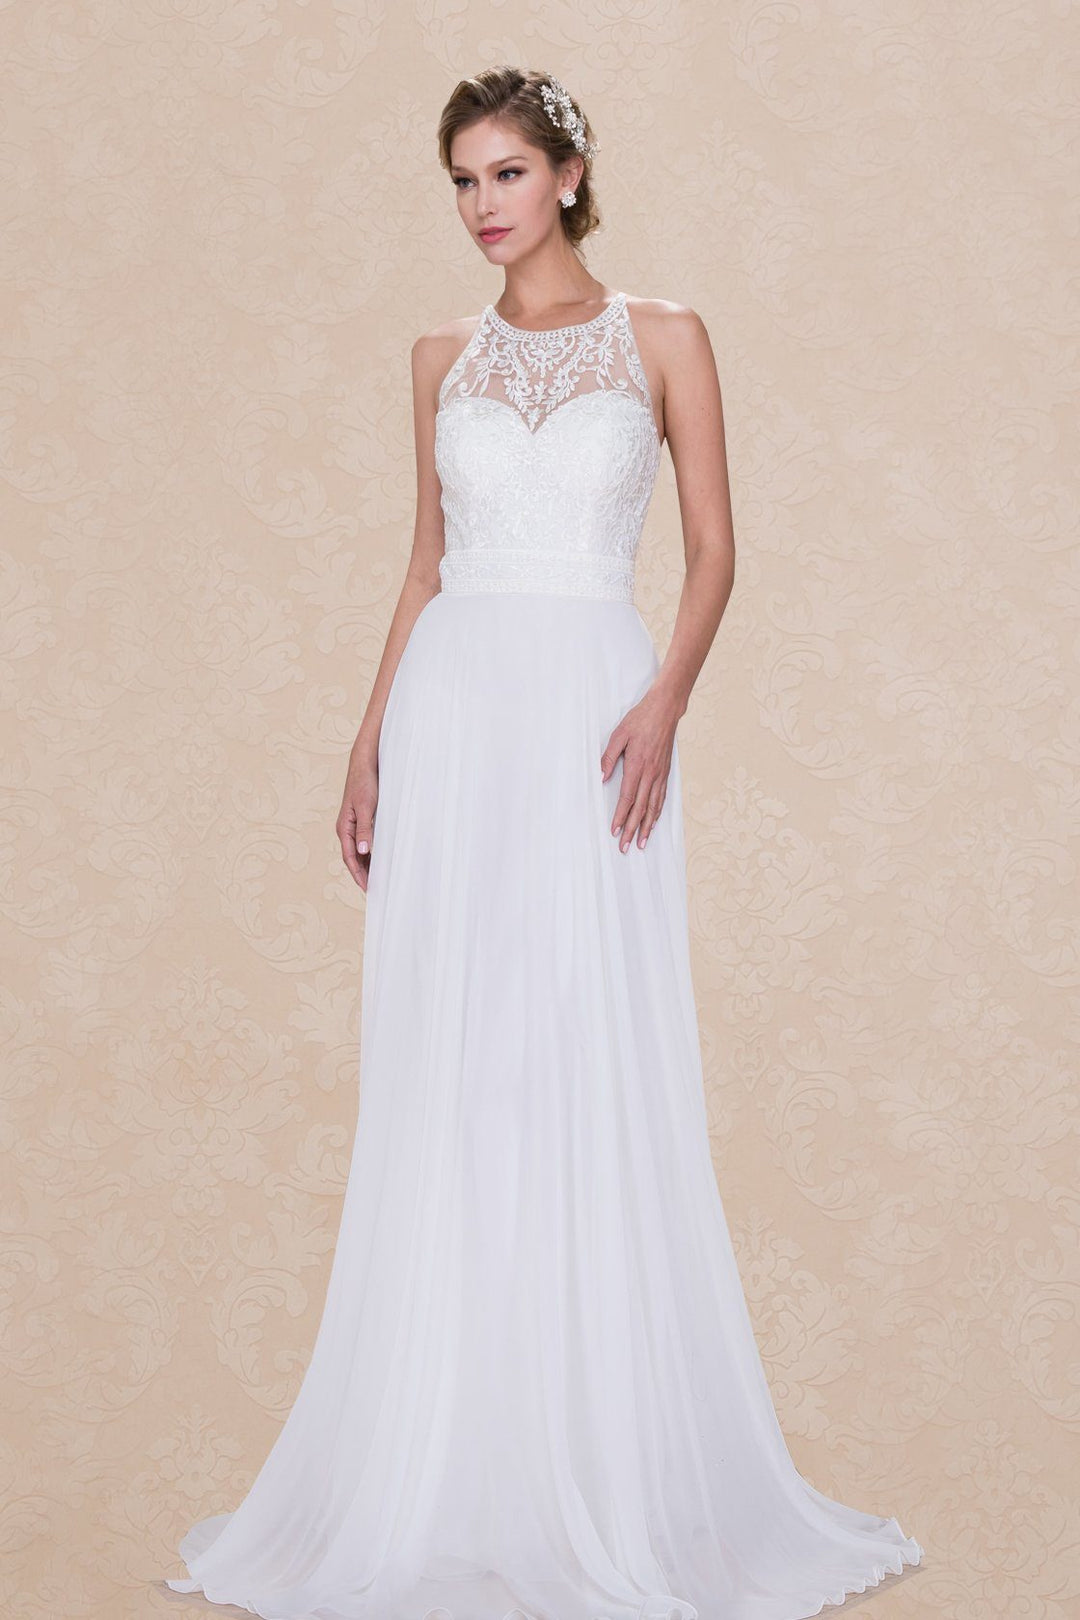 Halter Lace Bodice Wedding Dress by Leonia Lee 711 - Outlet